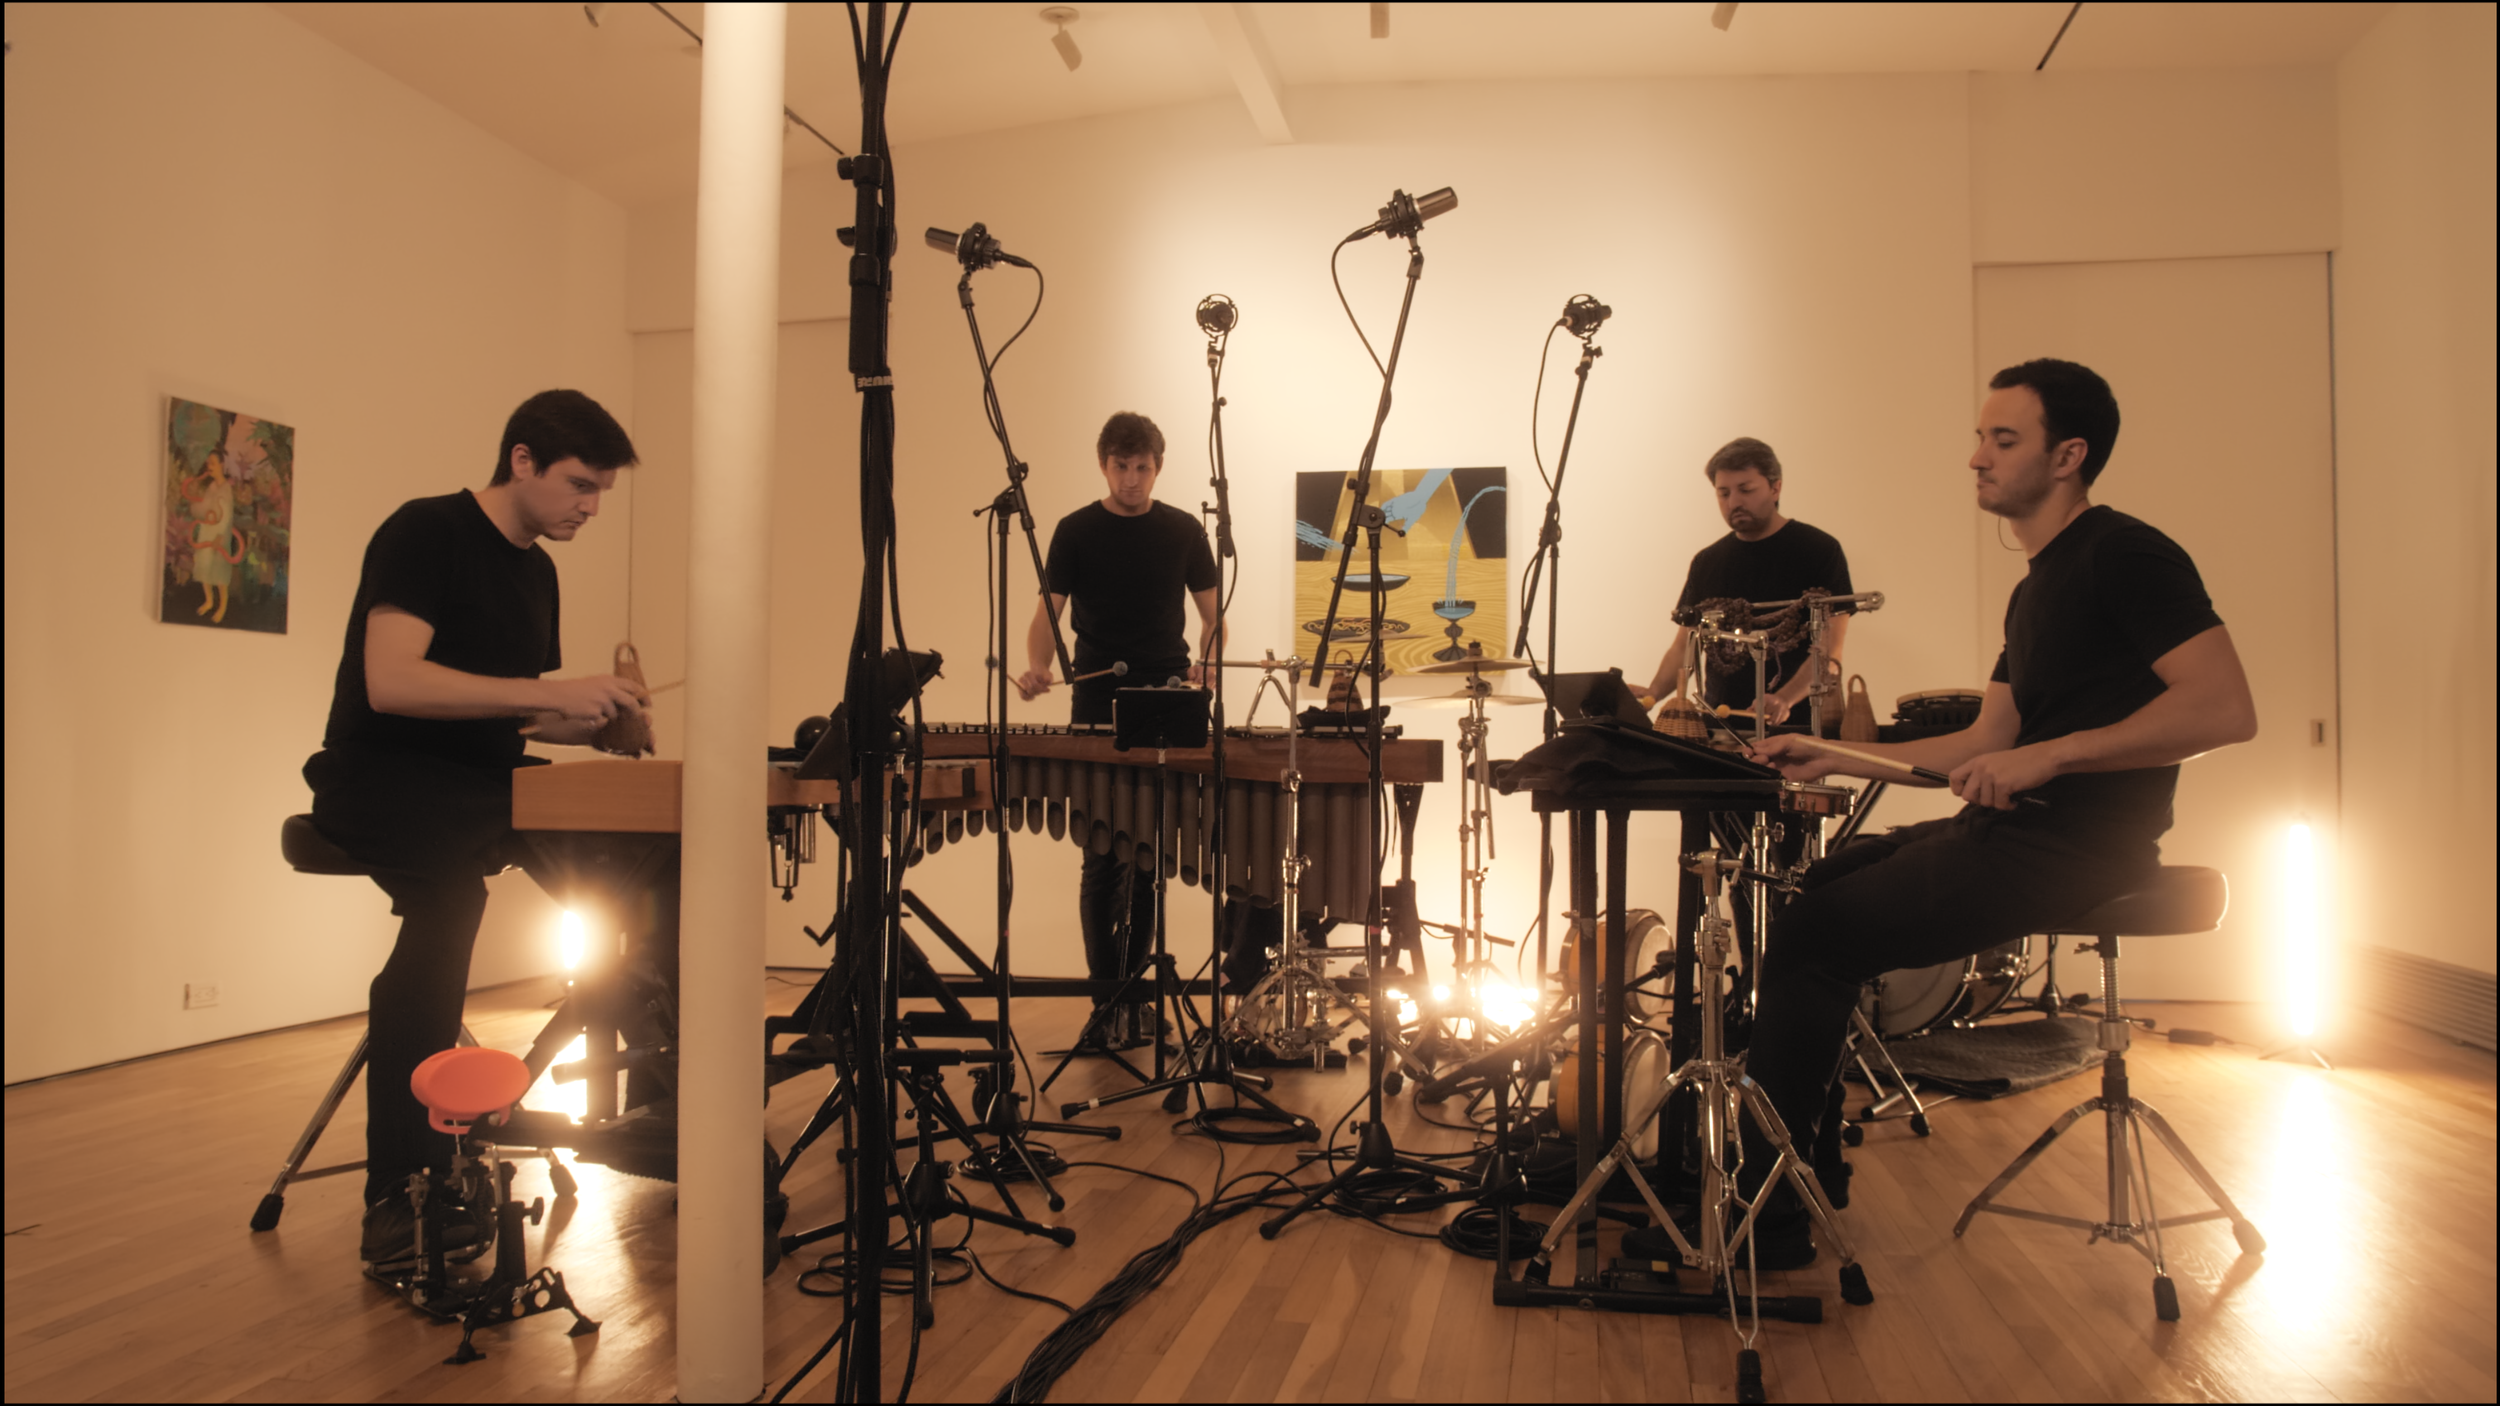 12. An image of four percussionists playing in a semi-circle format, seated and standing, playing various instruments such as a vibraphone, caxixi, and handclaps.